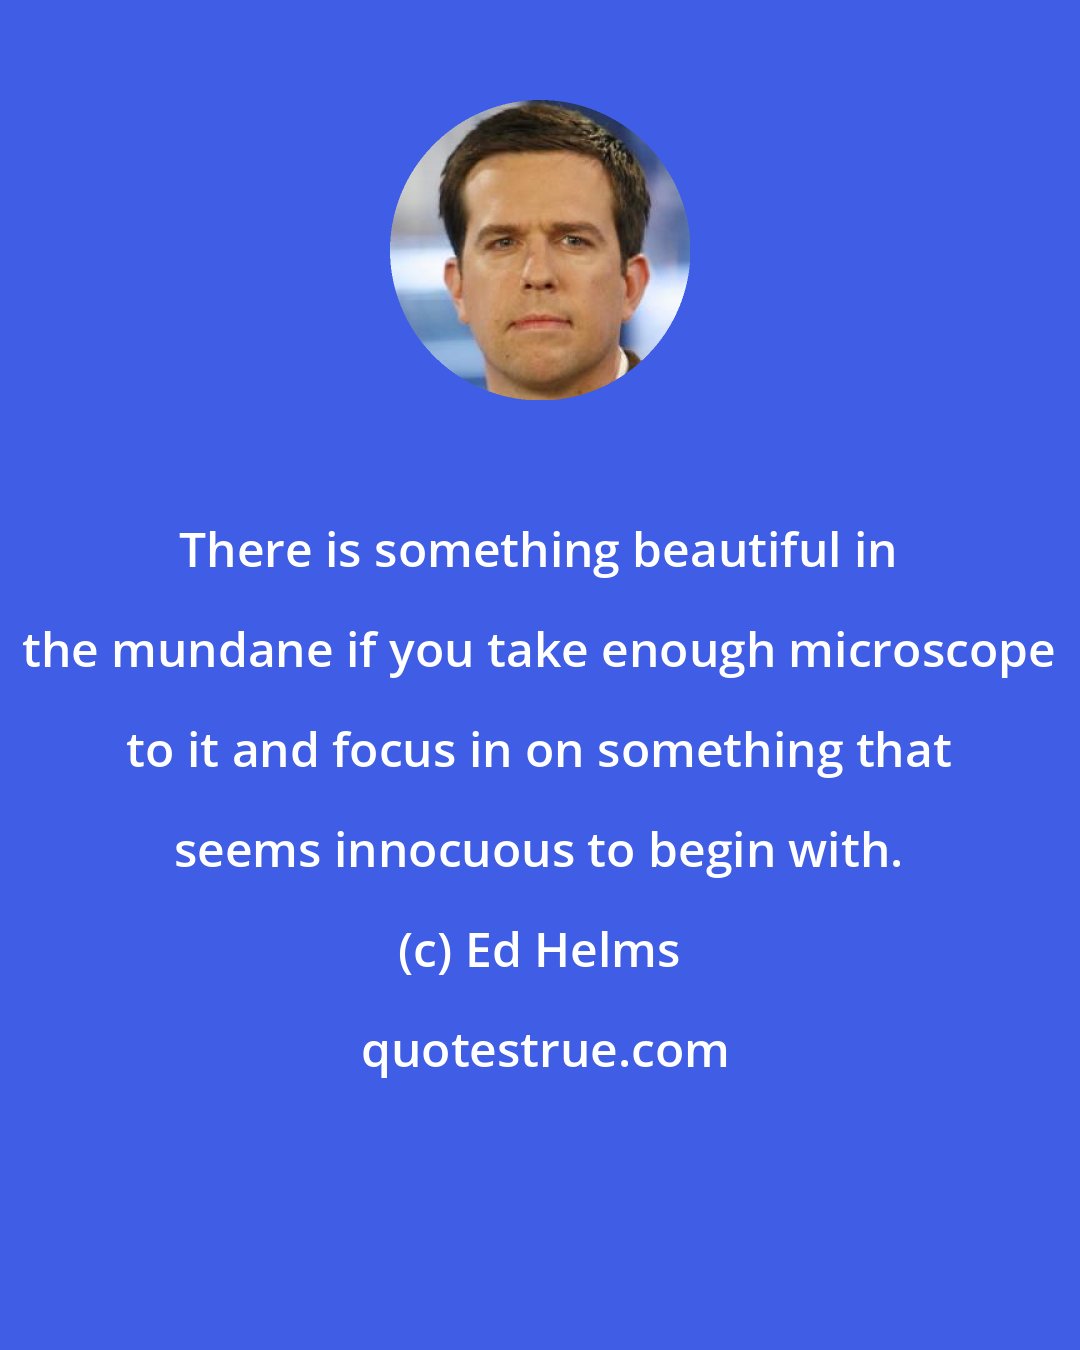 Ed Helms: There is something beautiful in the mundane if you take enough microscope to it and focus in on something that seems innocuous to begin with.